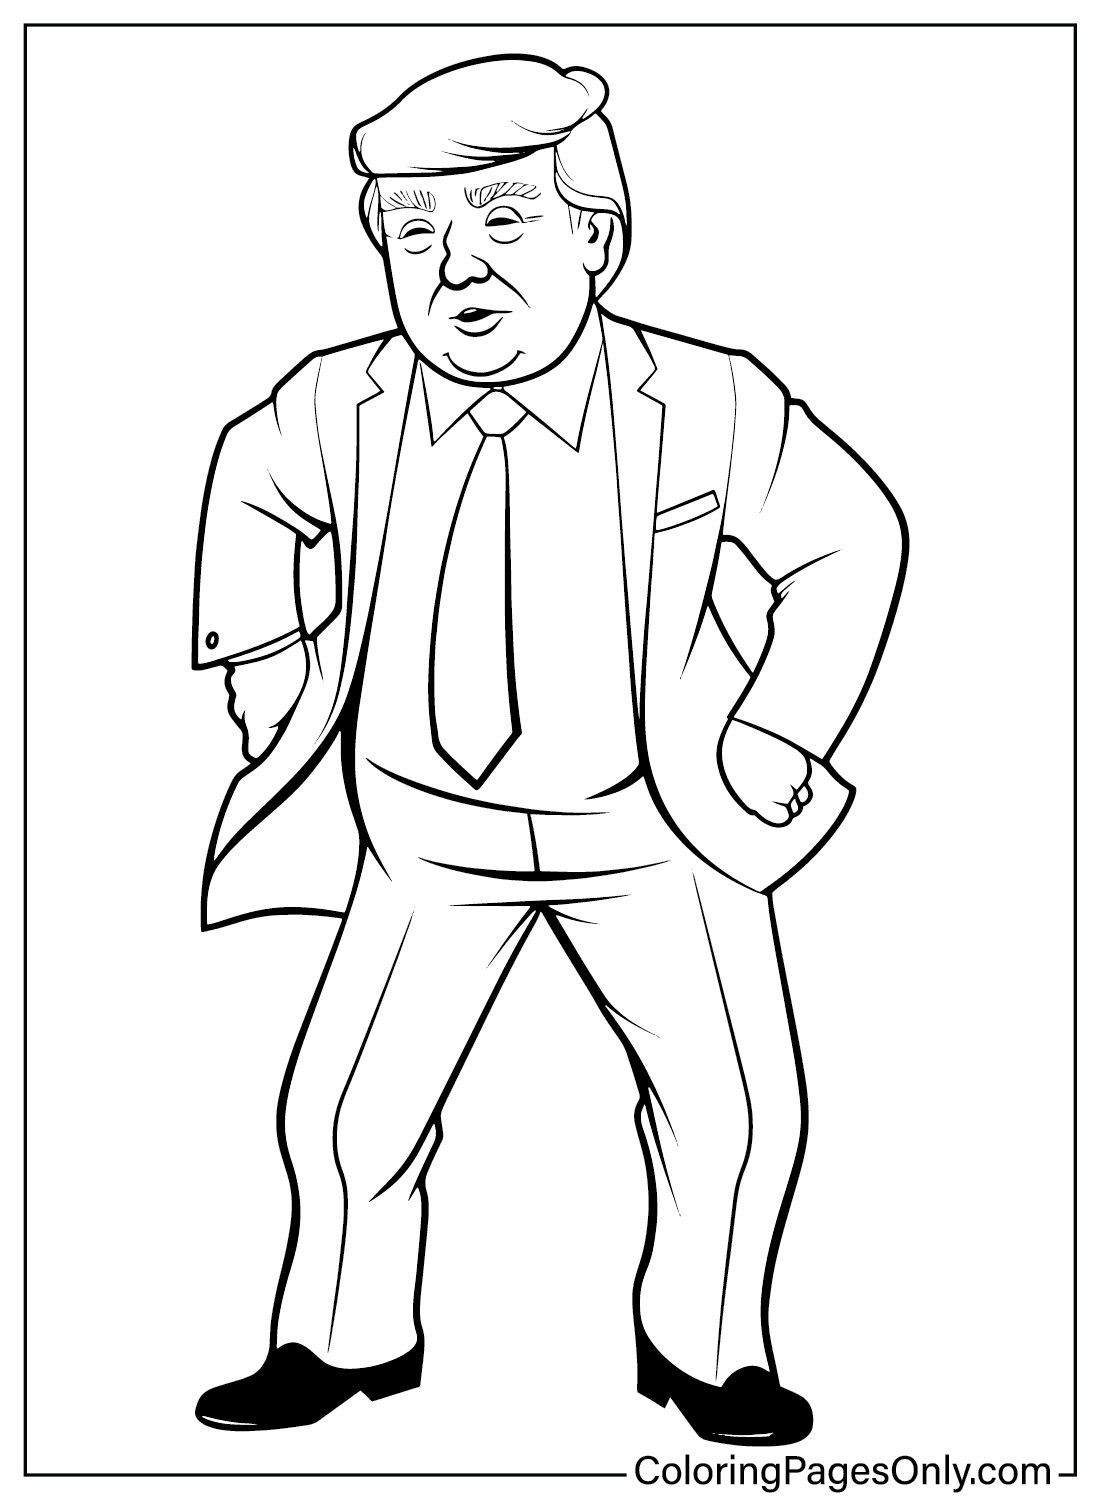 Printable Donald Trump Coloring Page from Donald Trump